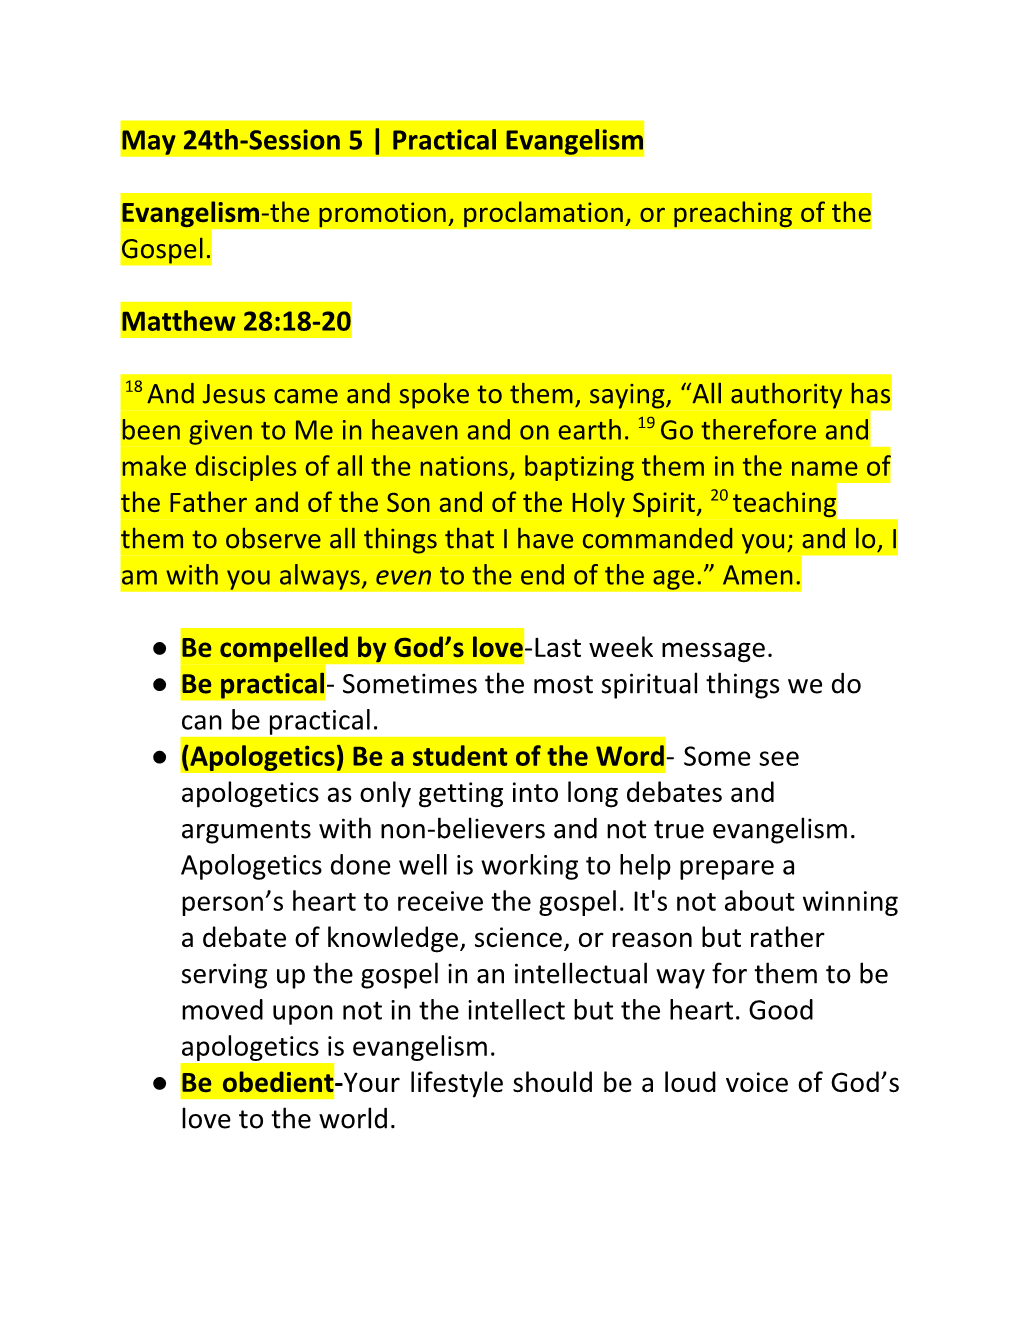 May 24Th-Session 5 | Practical Evangelism ​